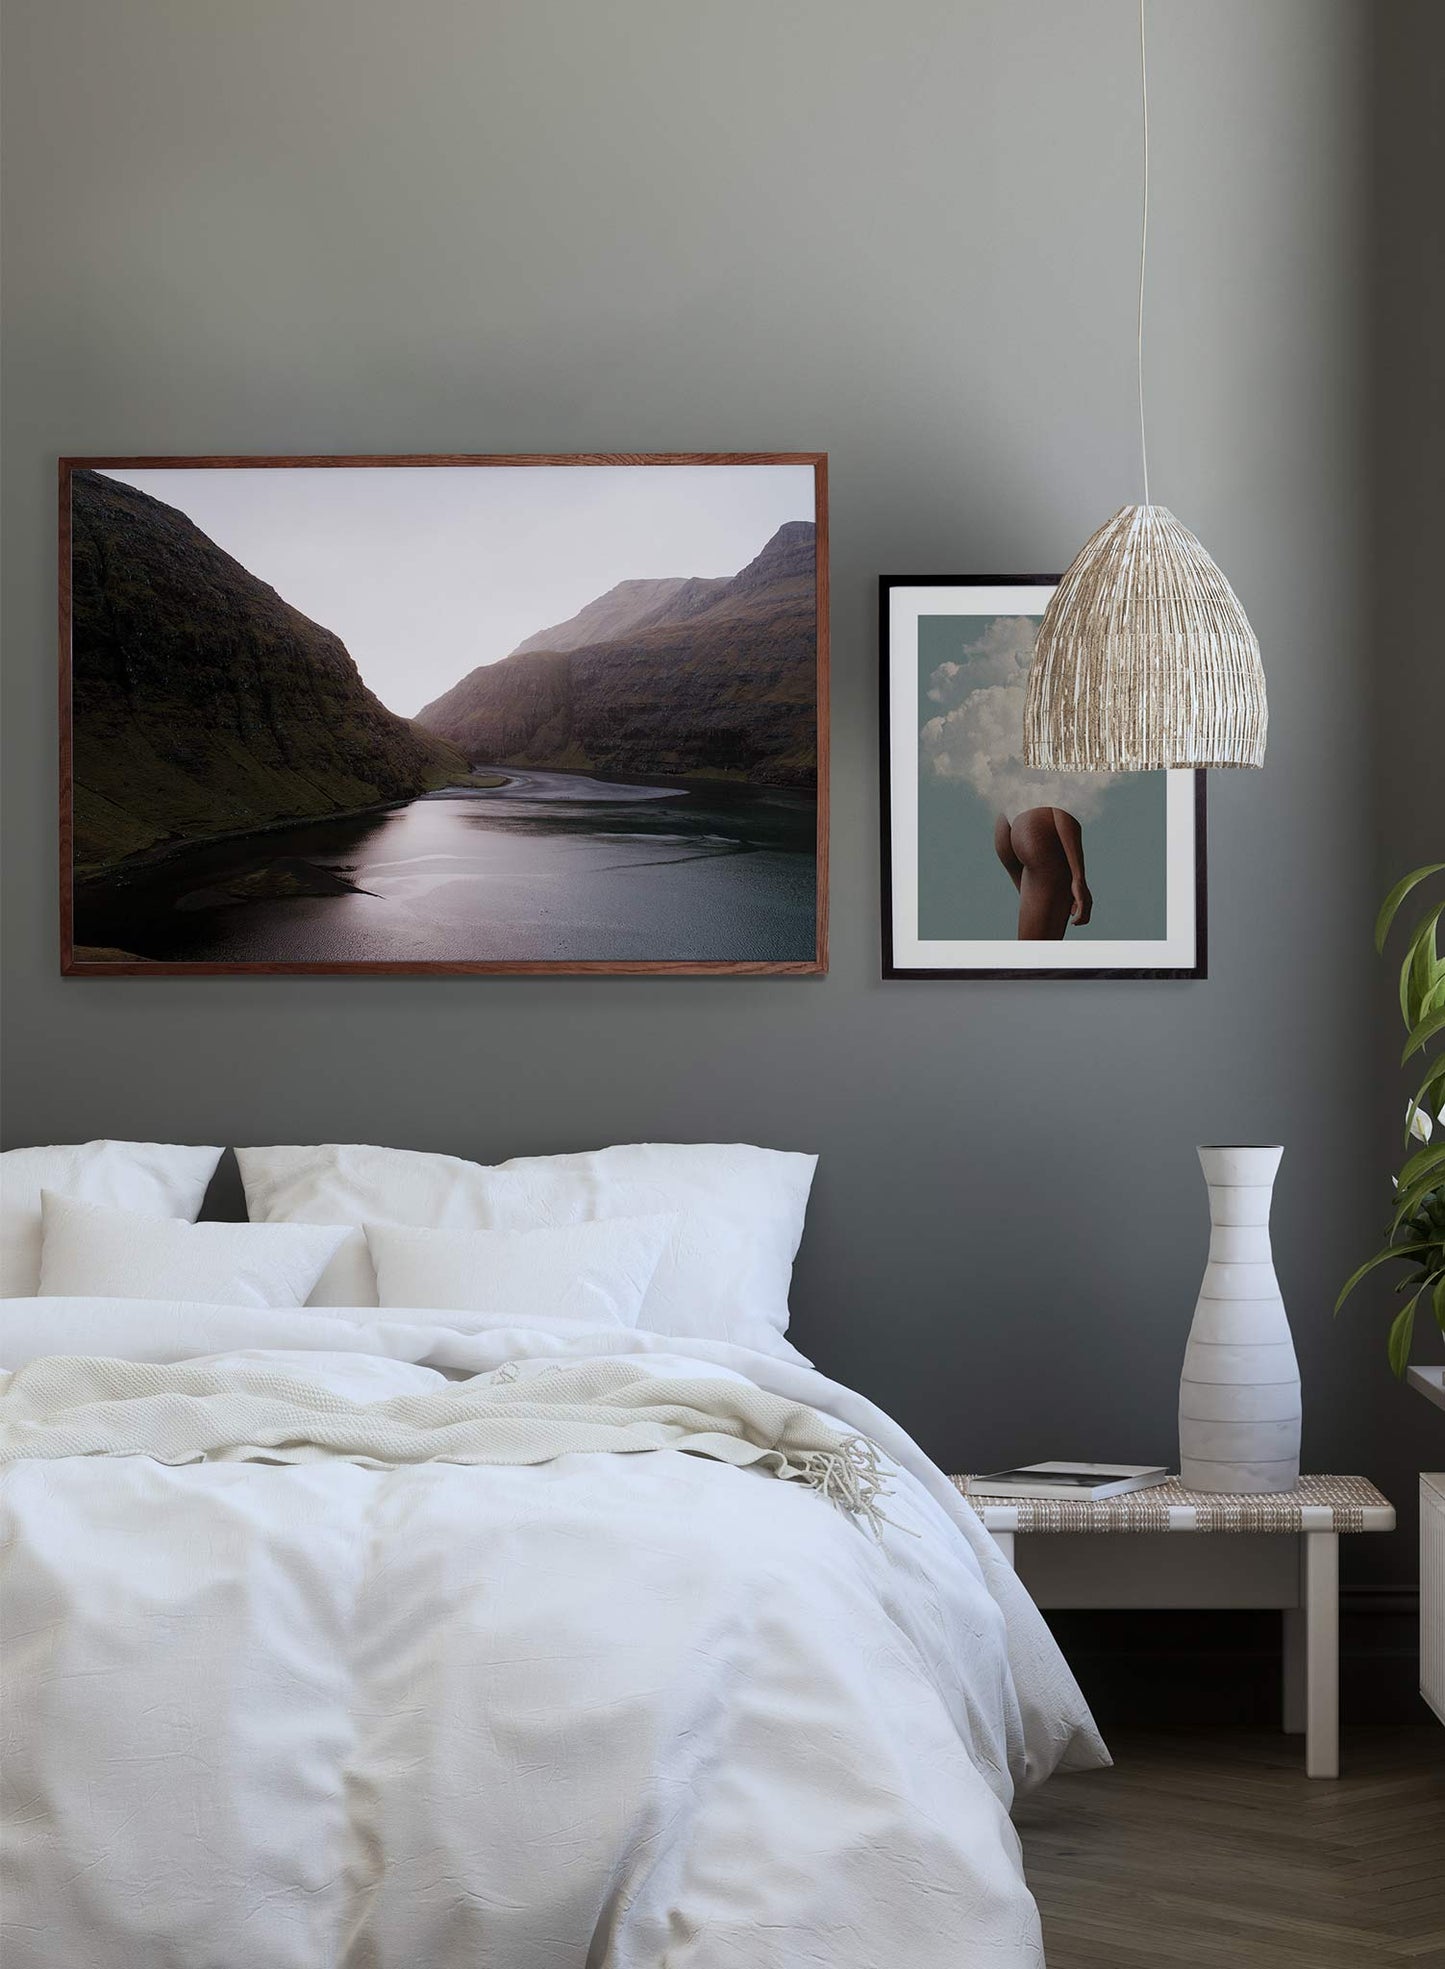 Infinite Valley' is a landscape photography poster by Opposite Wall of a calm river passing through tall mountains in the Faroe Islands.